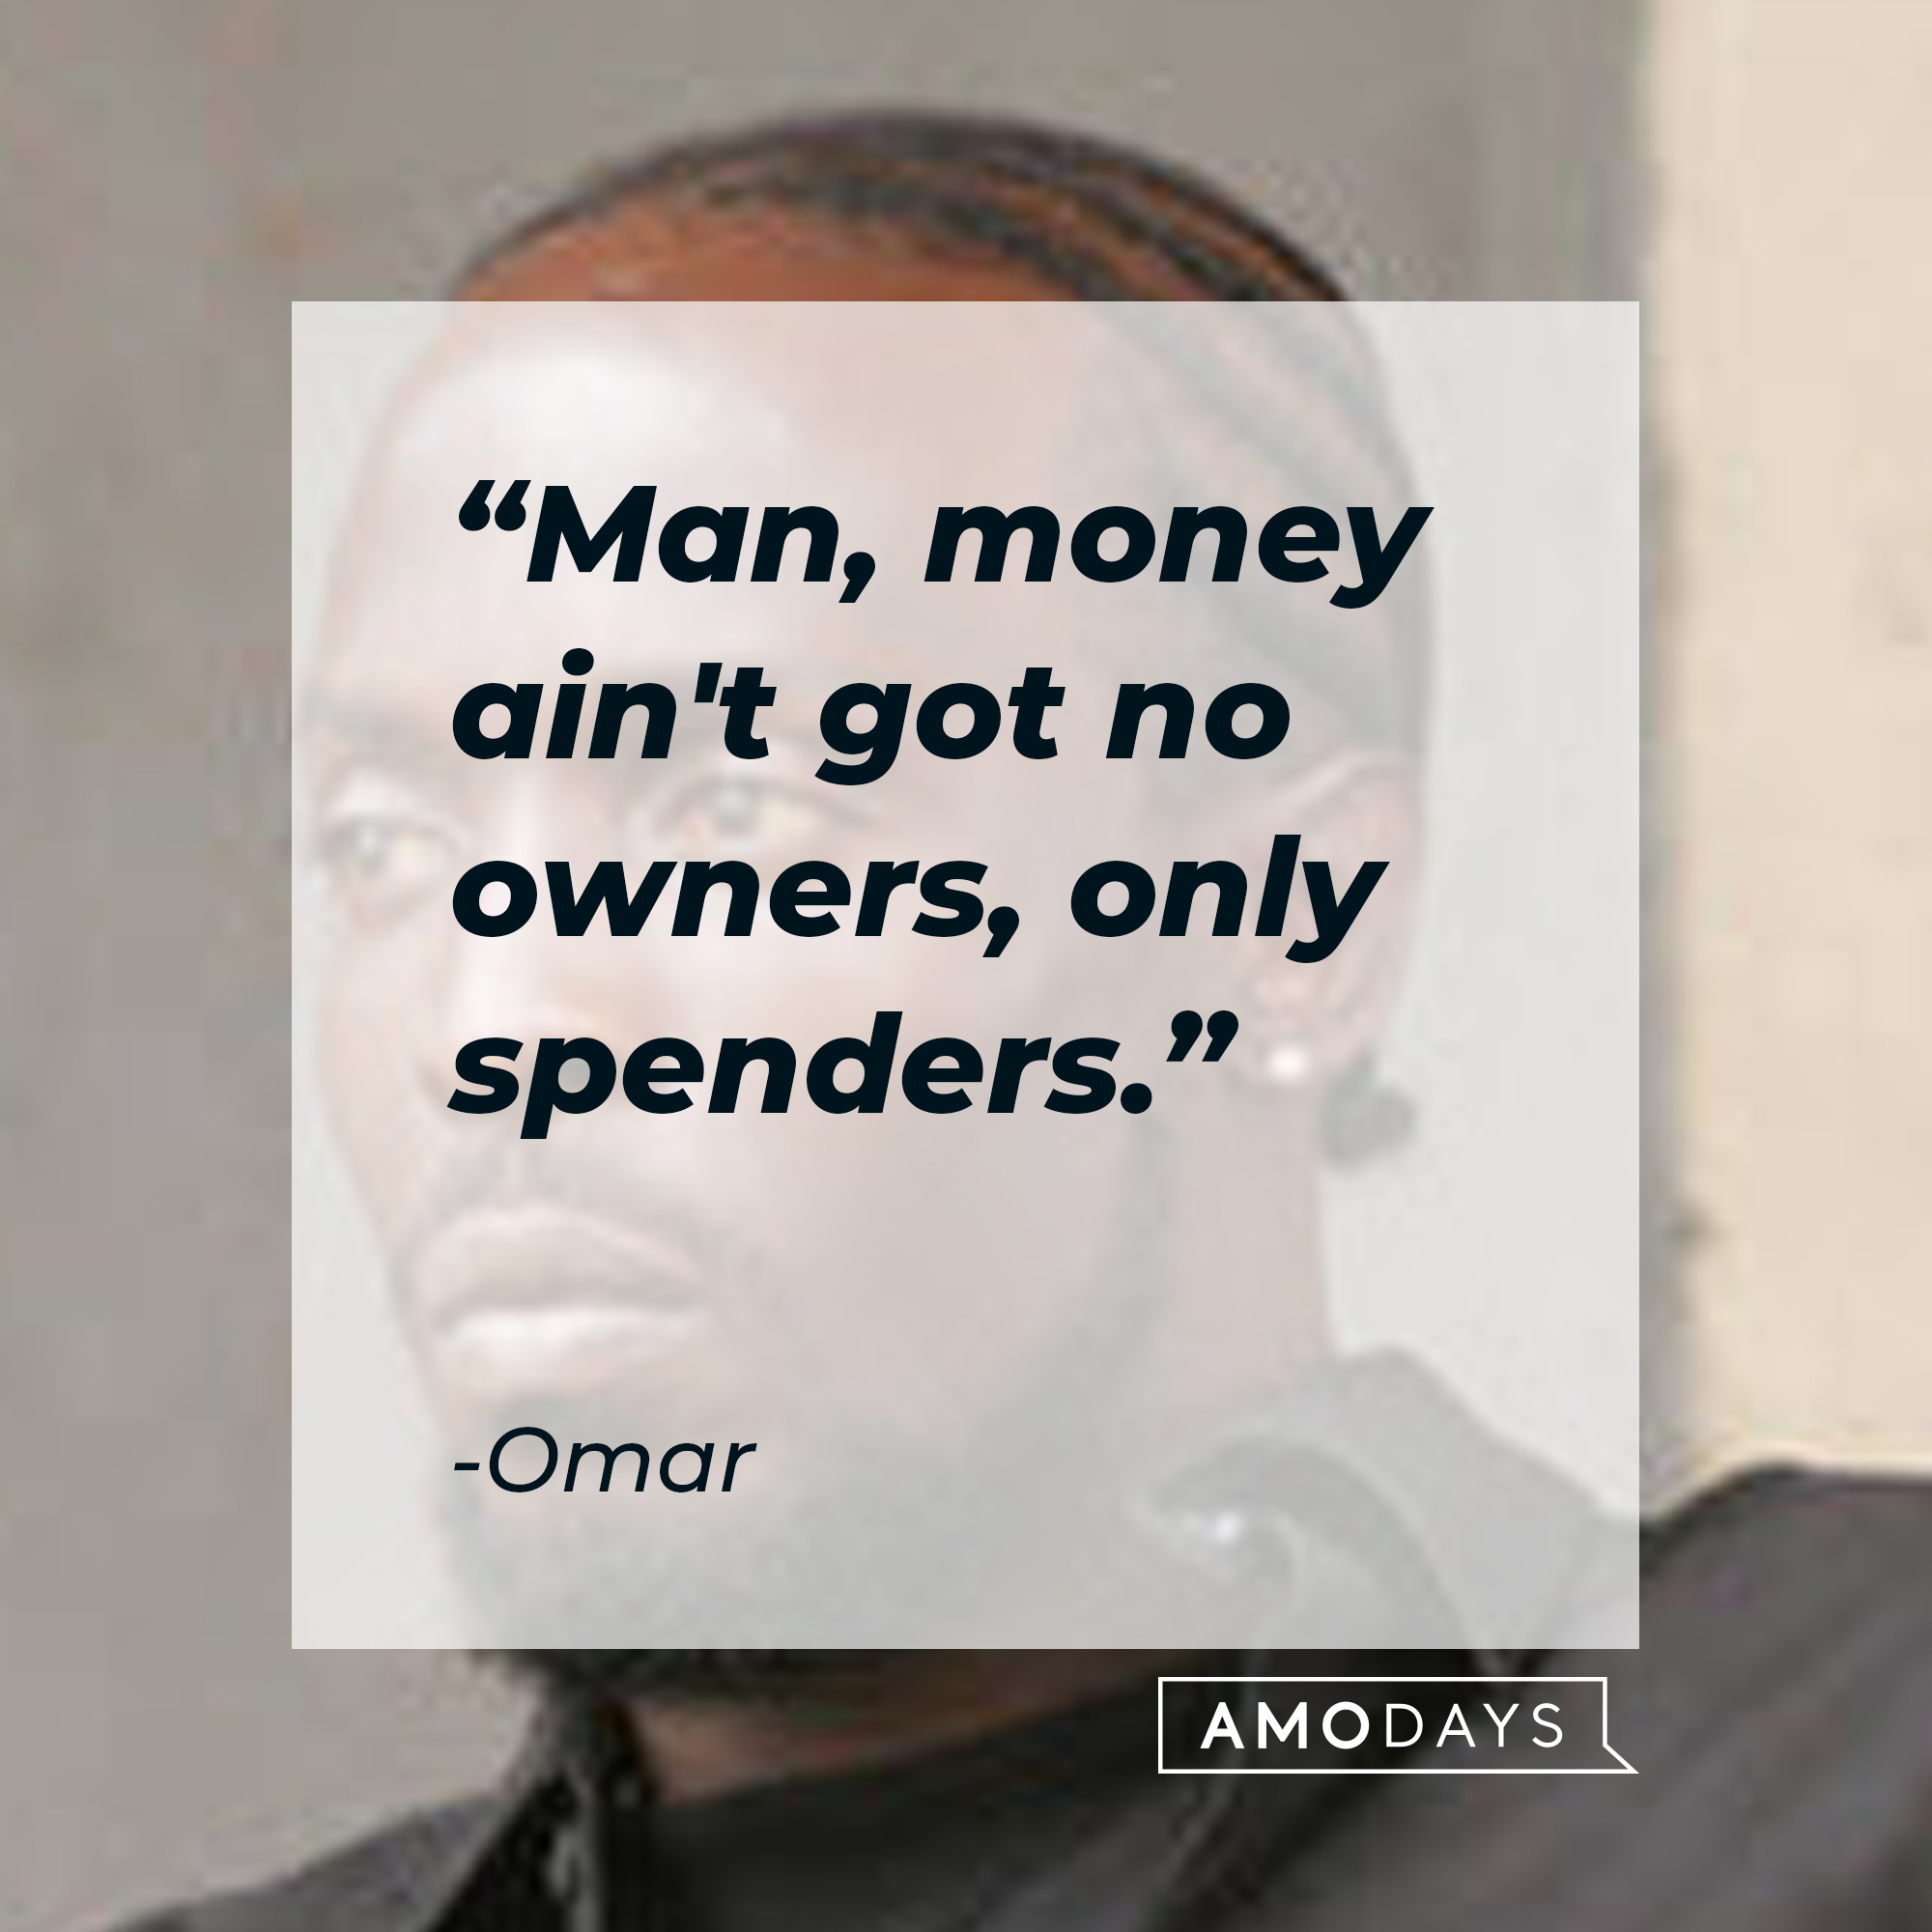 Omar's quote: "Man, money ain't got no owners, only spenders." | Source: facebook.com/TheWire